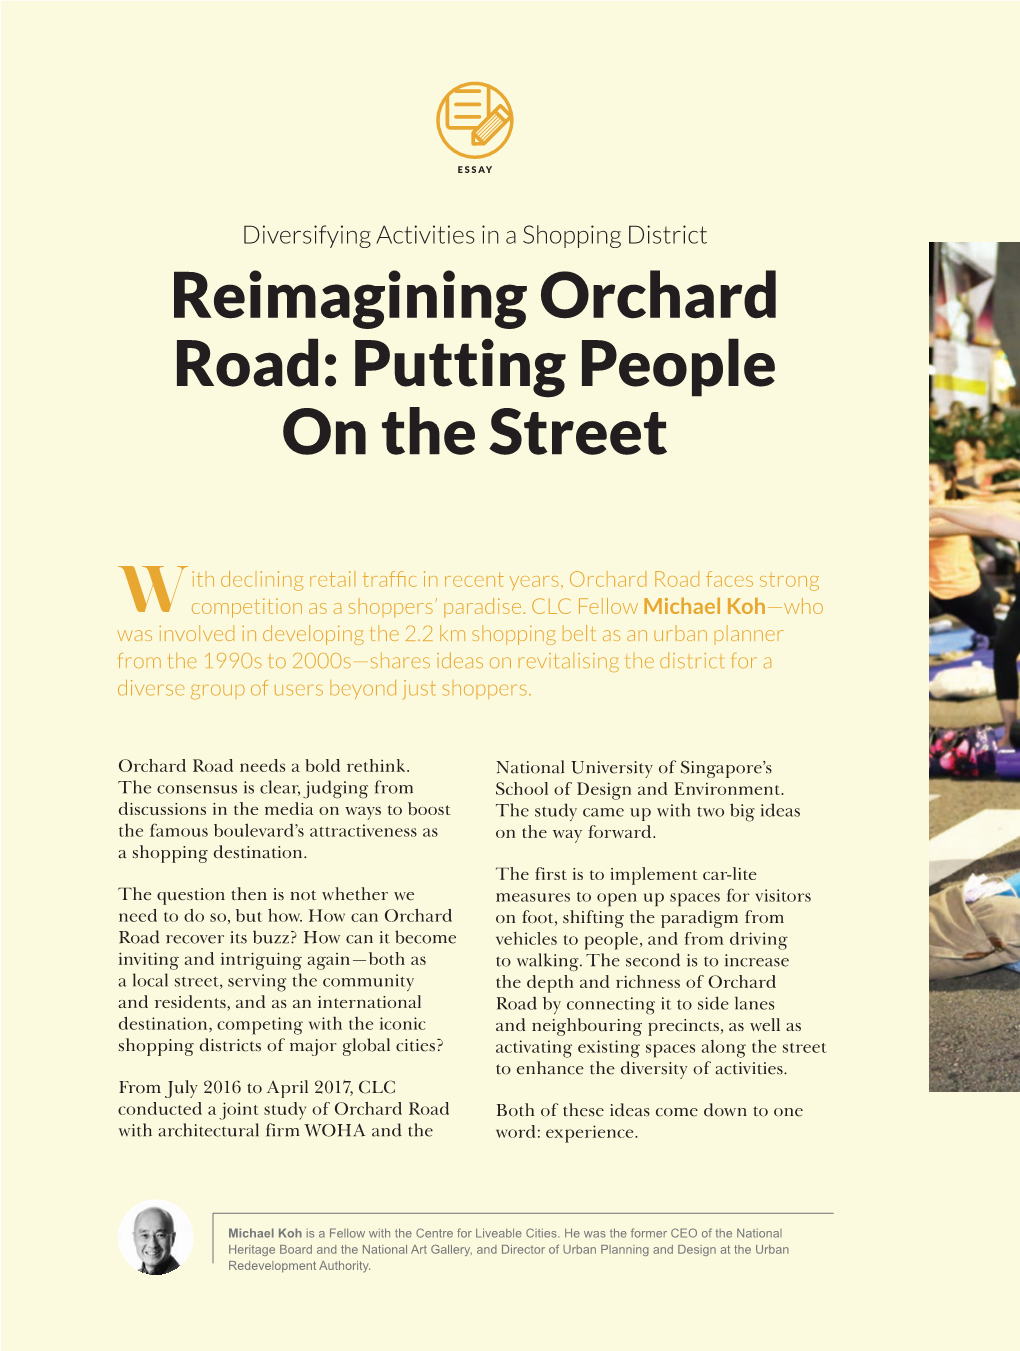 Reimagining Orchard Road: Putting People on the Street